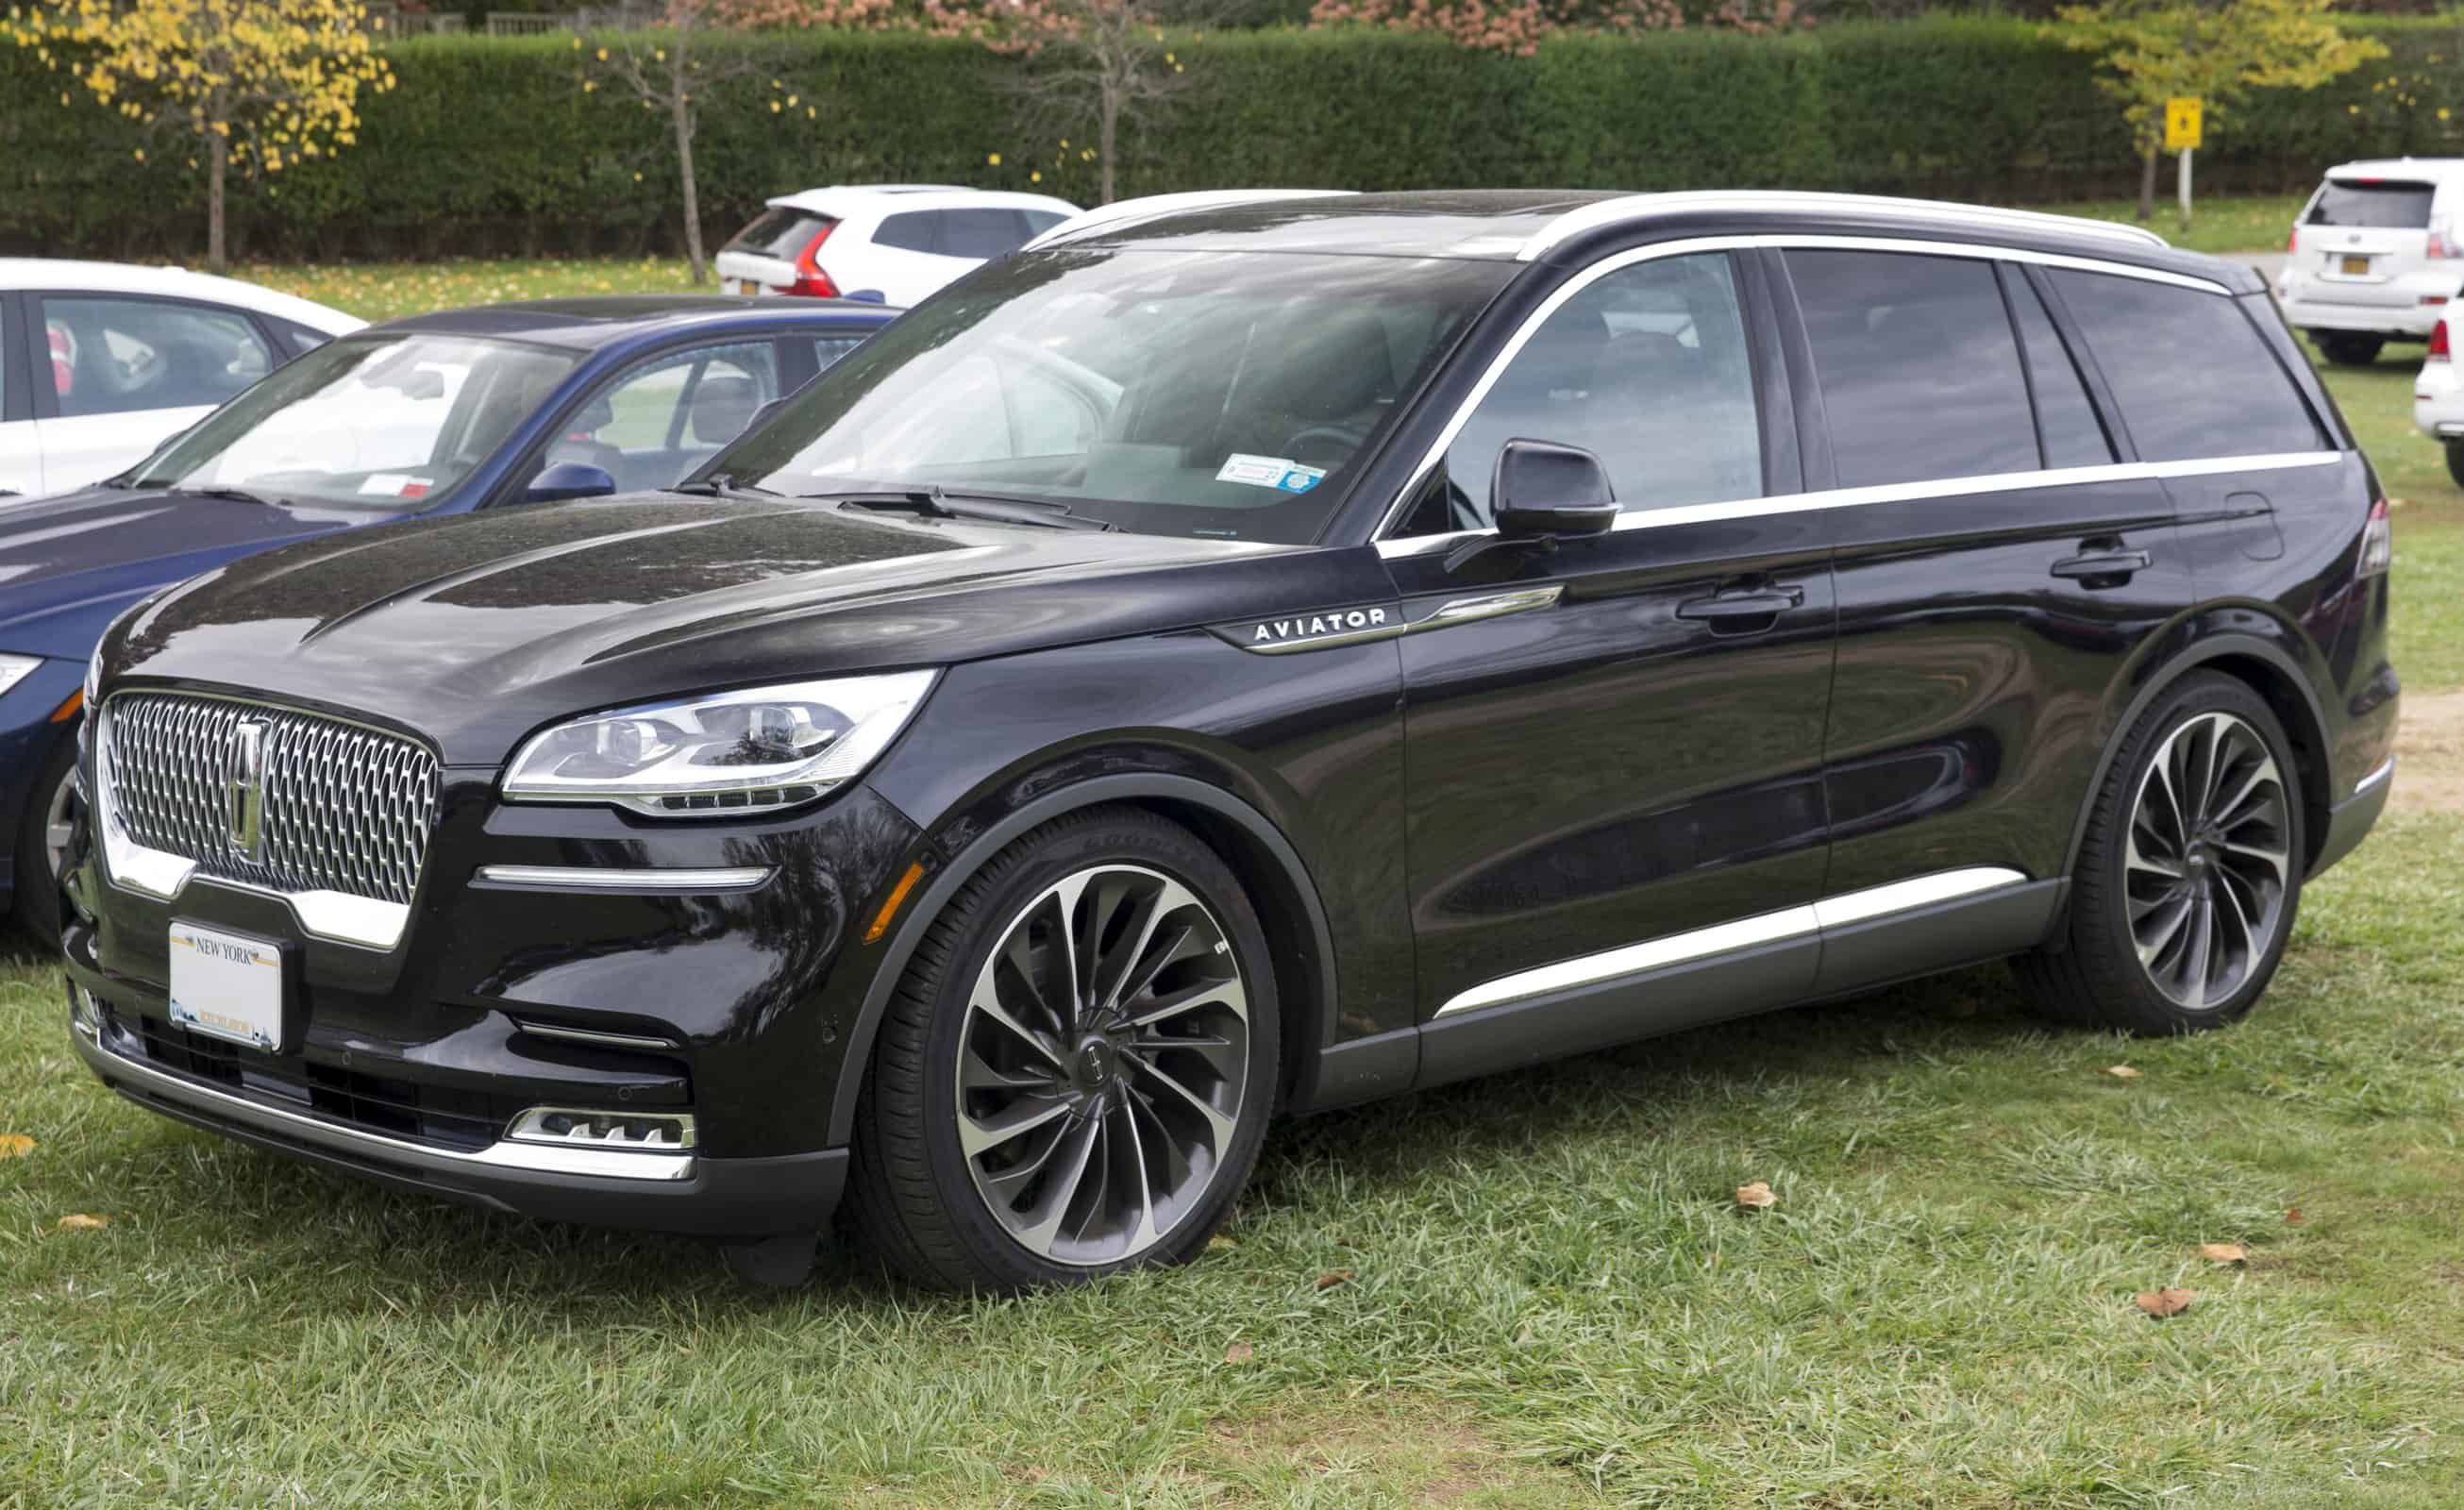 2020 Lincoln Aviator Reserve in Infinite Black, front left by Mr.choppers